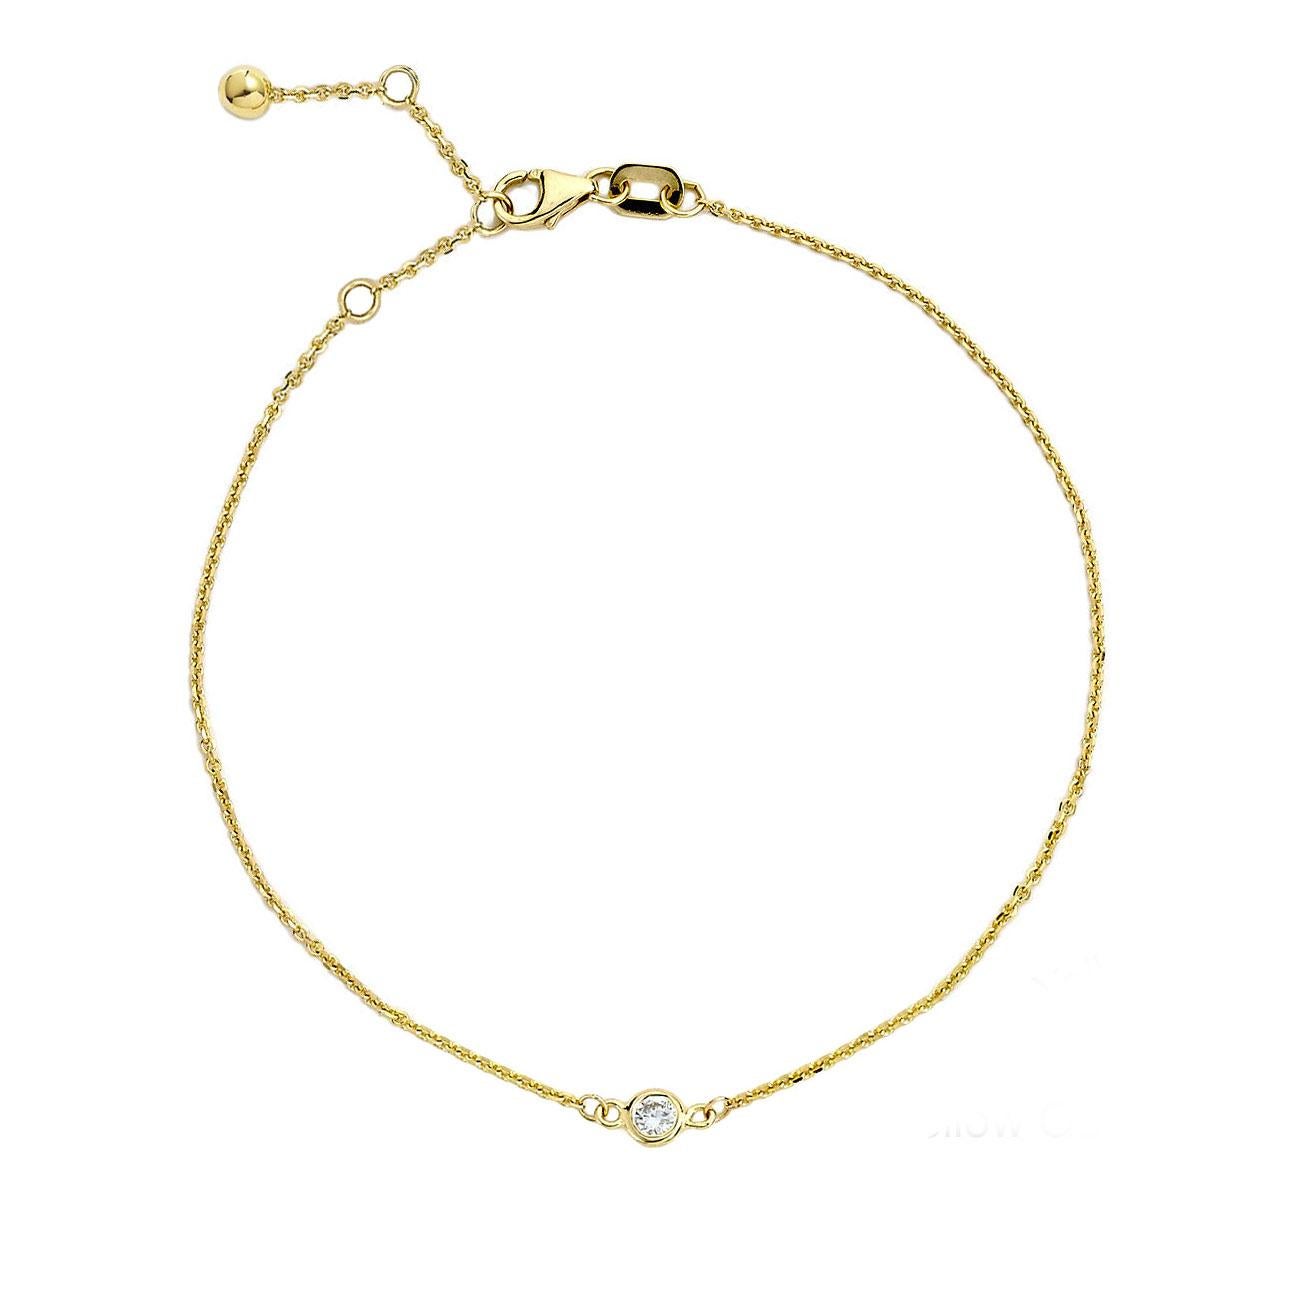 Add some sparkle to your wrist with this beautiful diamond solitaire bracelet by Suzy Levian. This magnificent bracelet boasts a brilliant round-cut diamond in an exquisite bezel adorned of 14-karat yellow gold. This bracelet features a high polish